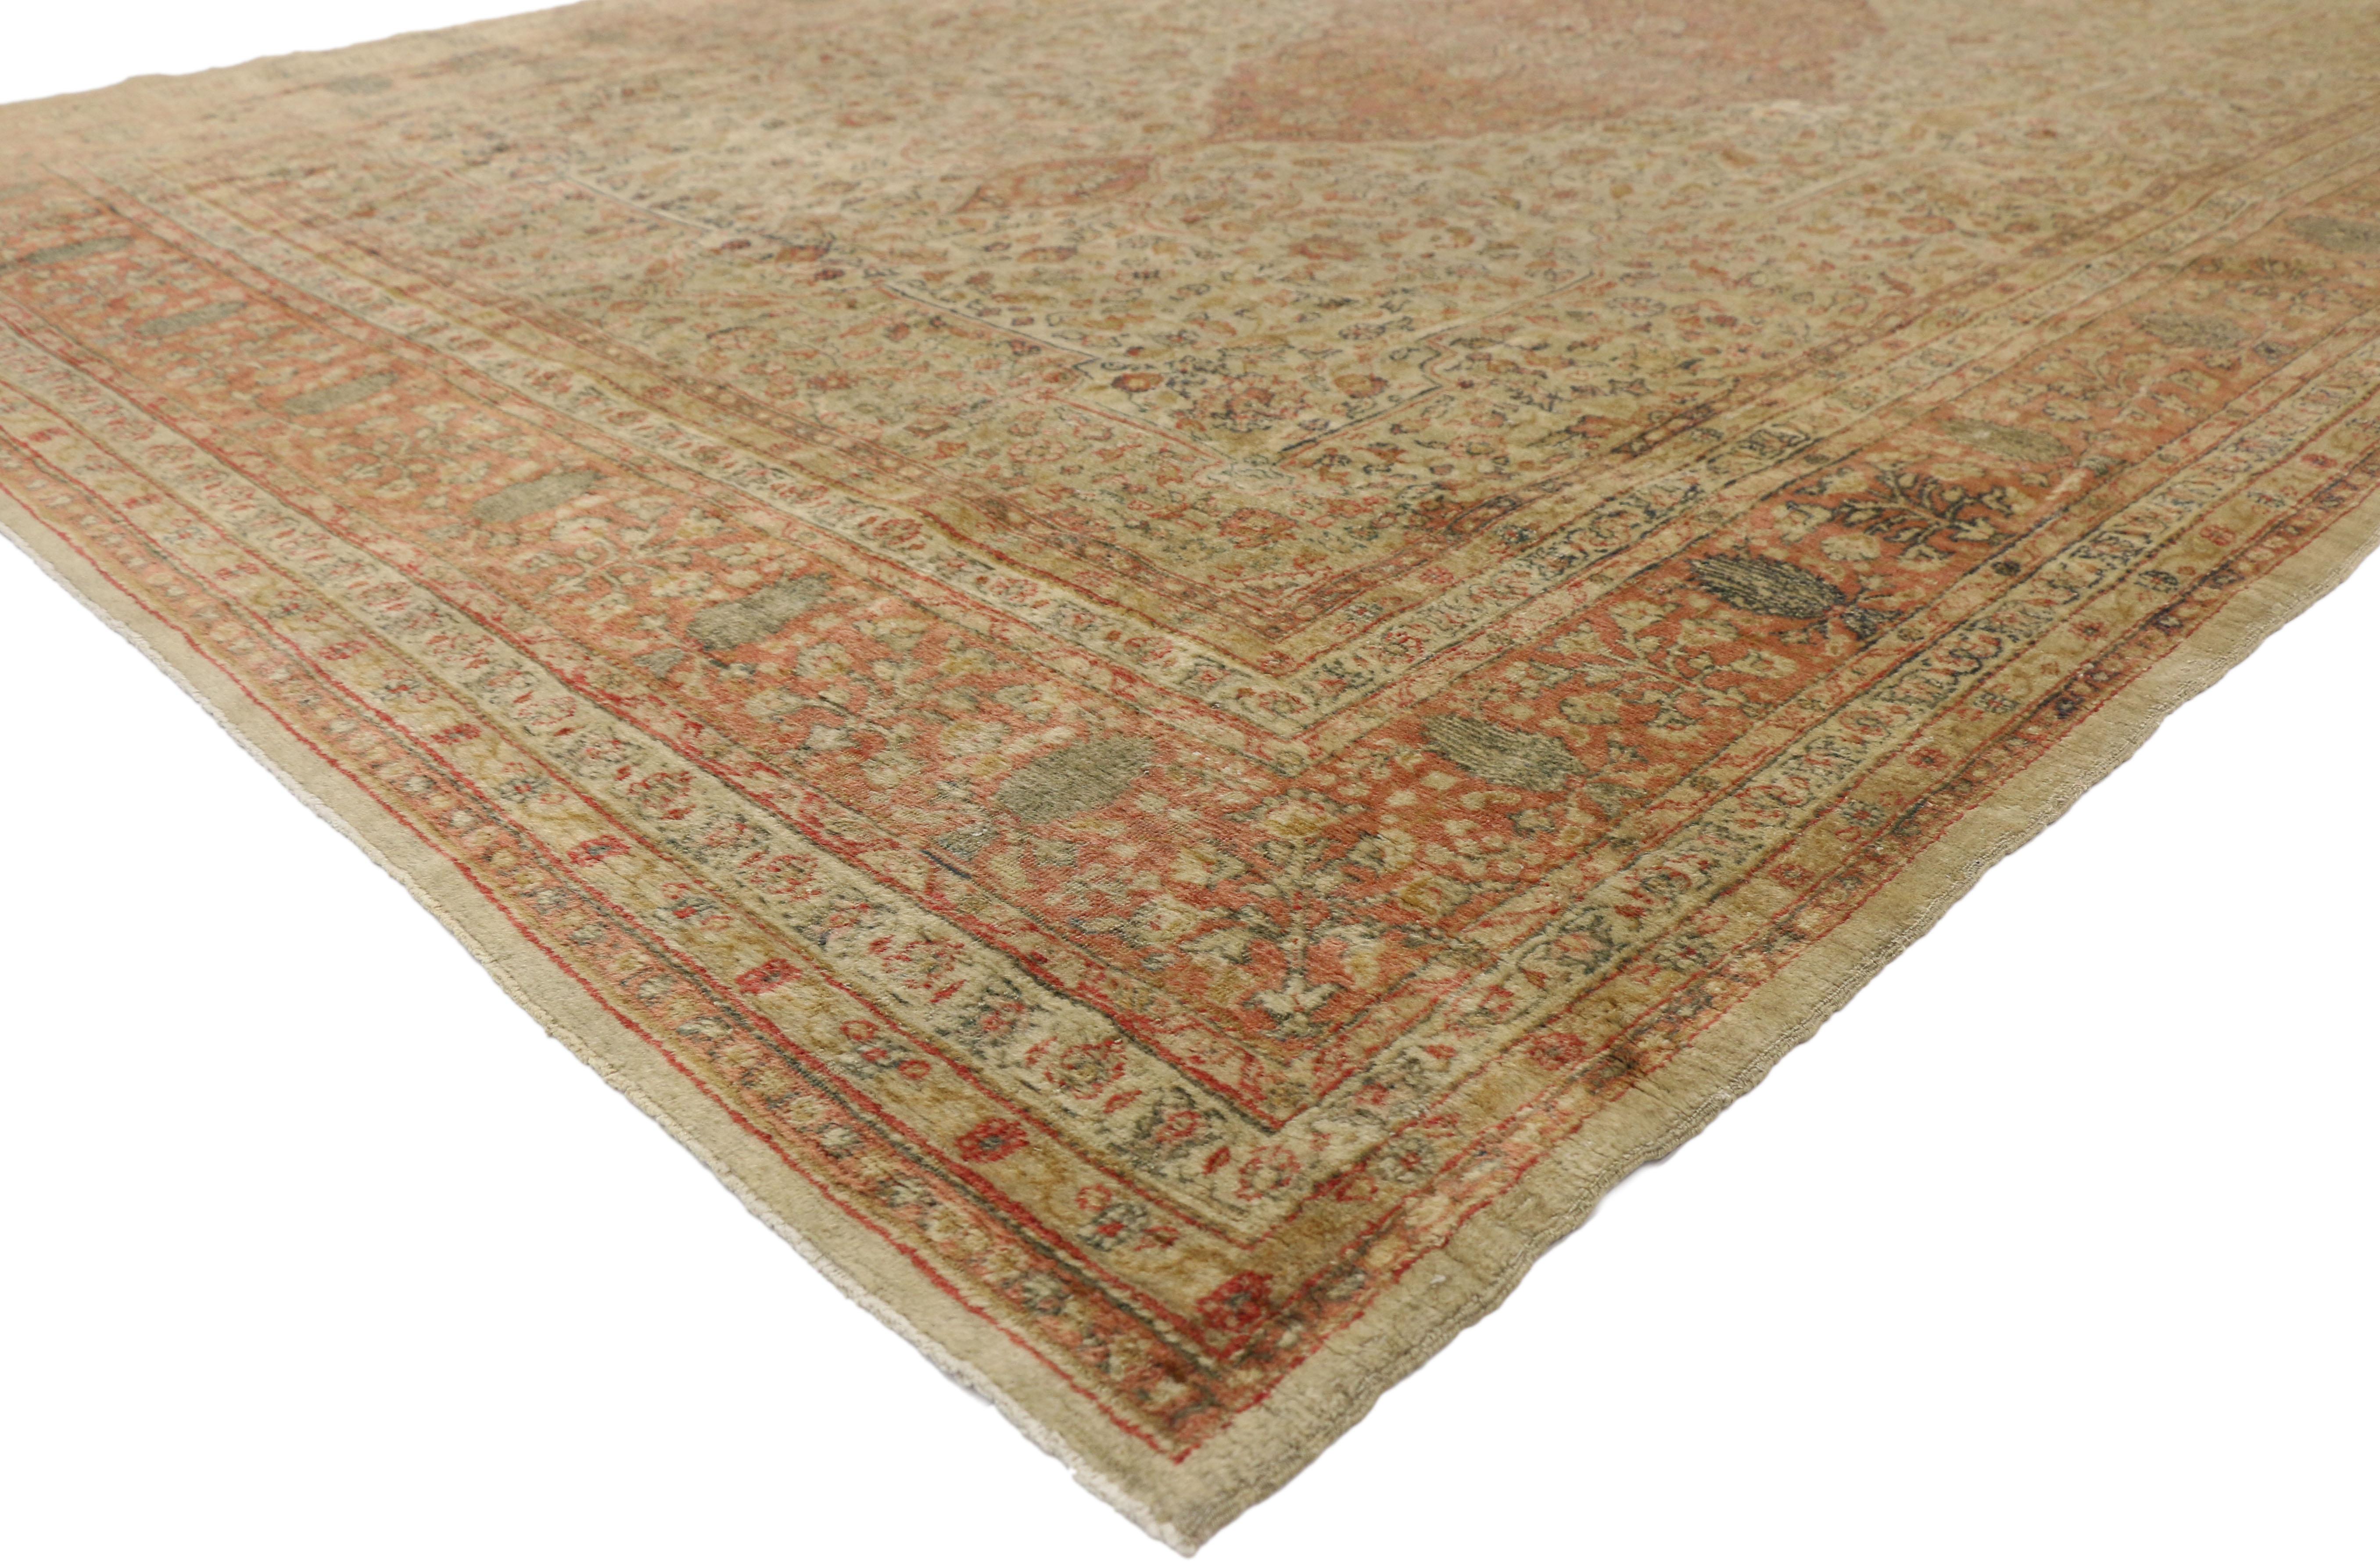 77293 Distressed Vintage Turkish Sivas Rug with Rustic Northwestern Artisan Style. This hand knotted wool distressed vintage Turkish Sivas rug features a cusped oval medallion anchored with palmette finials at either end. The central medallion is